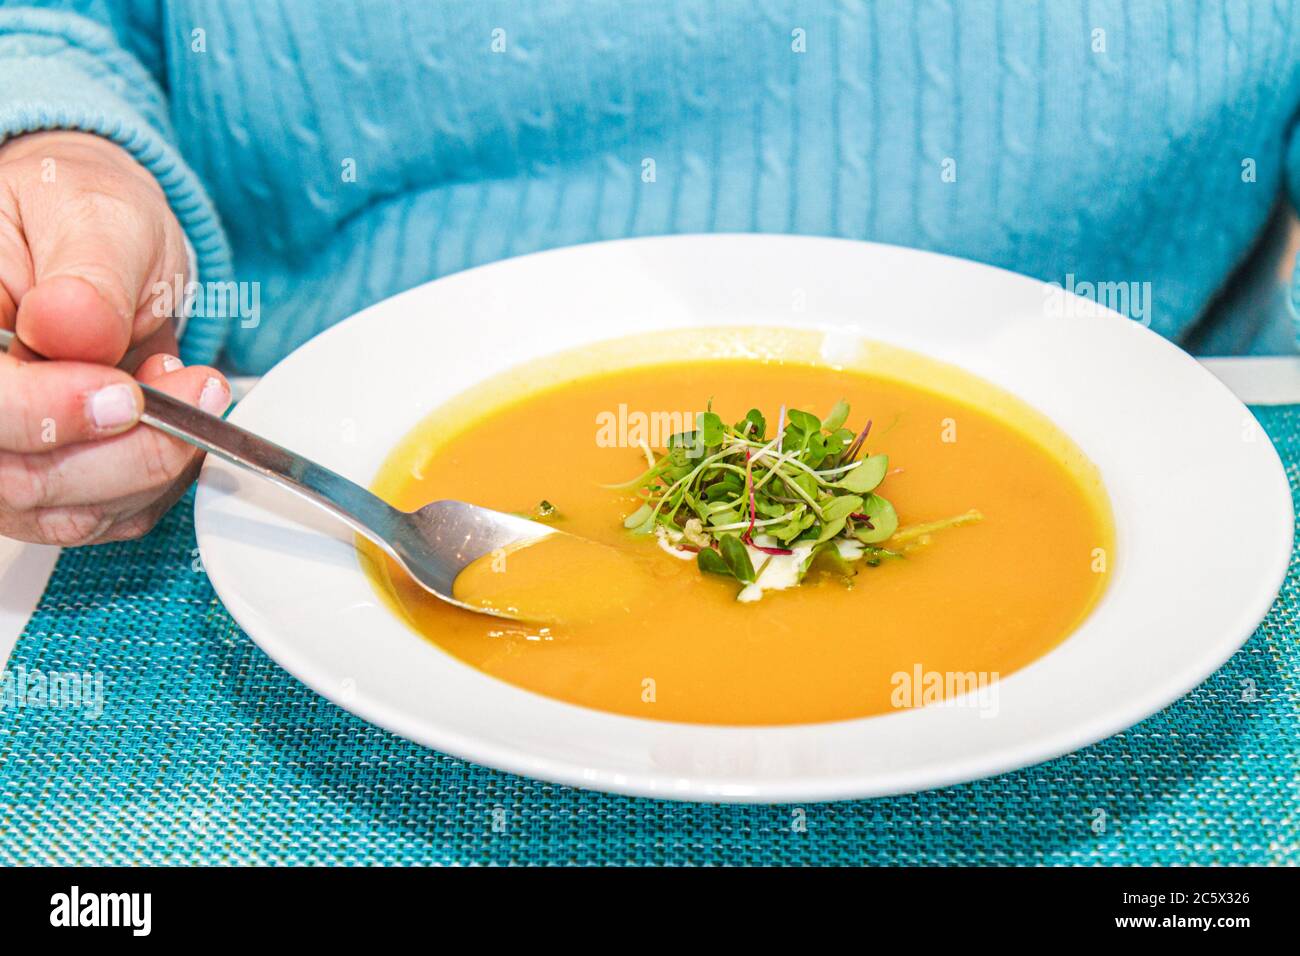 New York City,NYC NY Midtown,Manhattan,53rd Street,The Museum of Modern Art,MoMA,Terrace 5,cafe,carrot ginger soup,micro greens,bowl,spoon,restaurant Stock Photo